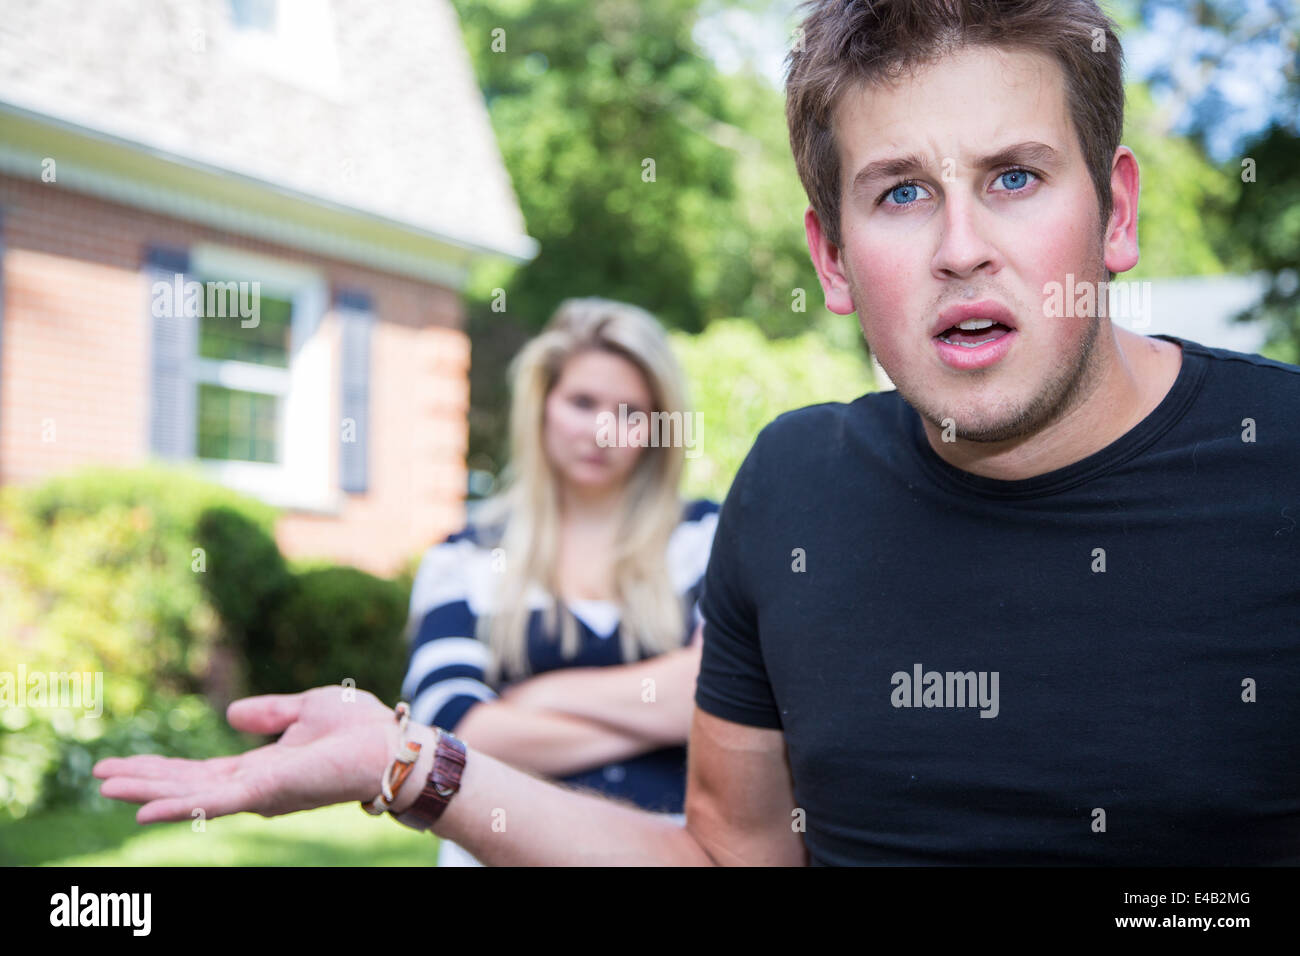 A bewildered and annoyed young man appears to feign innocence, while an angry young woman looks on from the background. Stock Photo